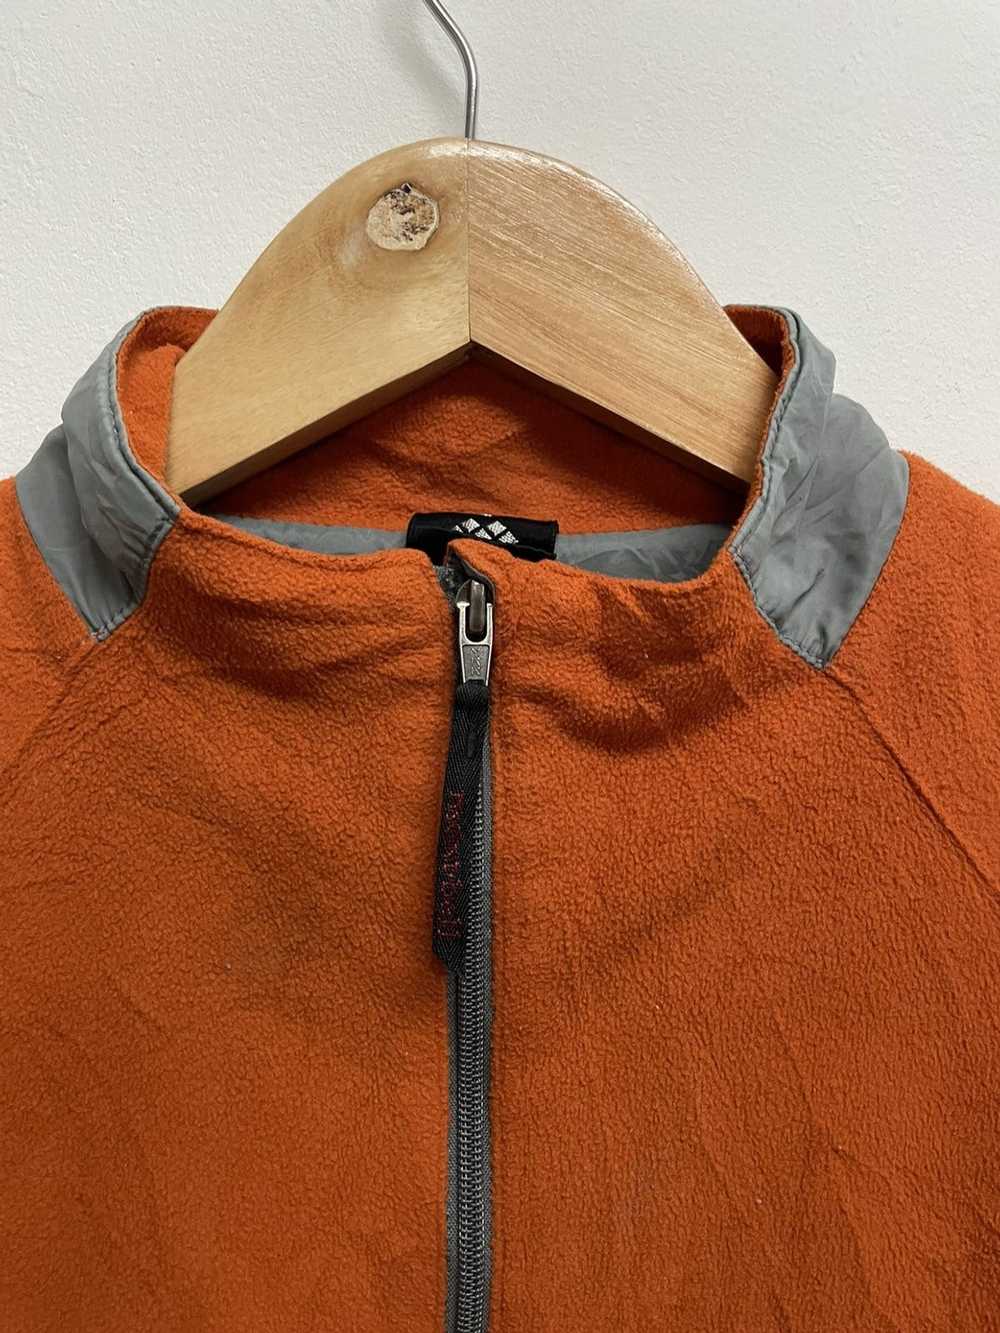 Montbell × Outdoor Life Montbell Fleece For Women - image 5